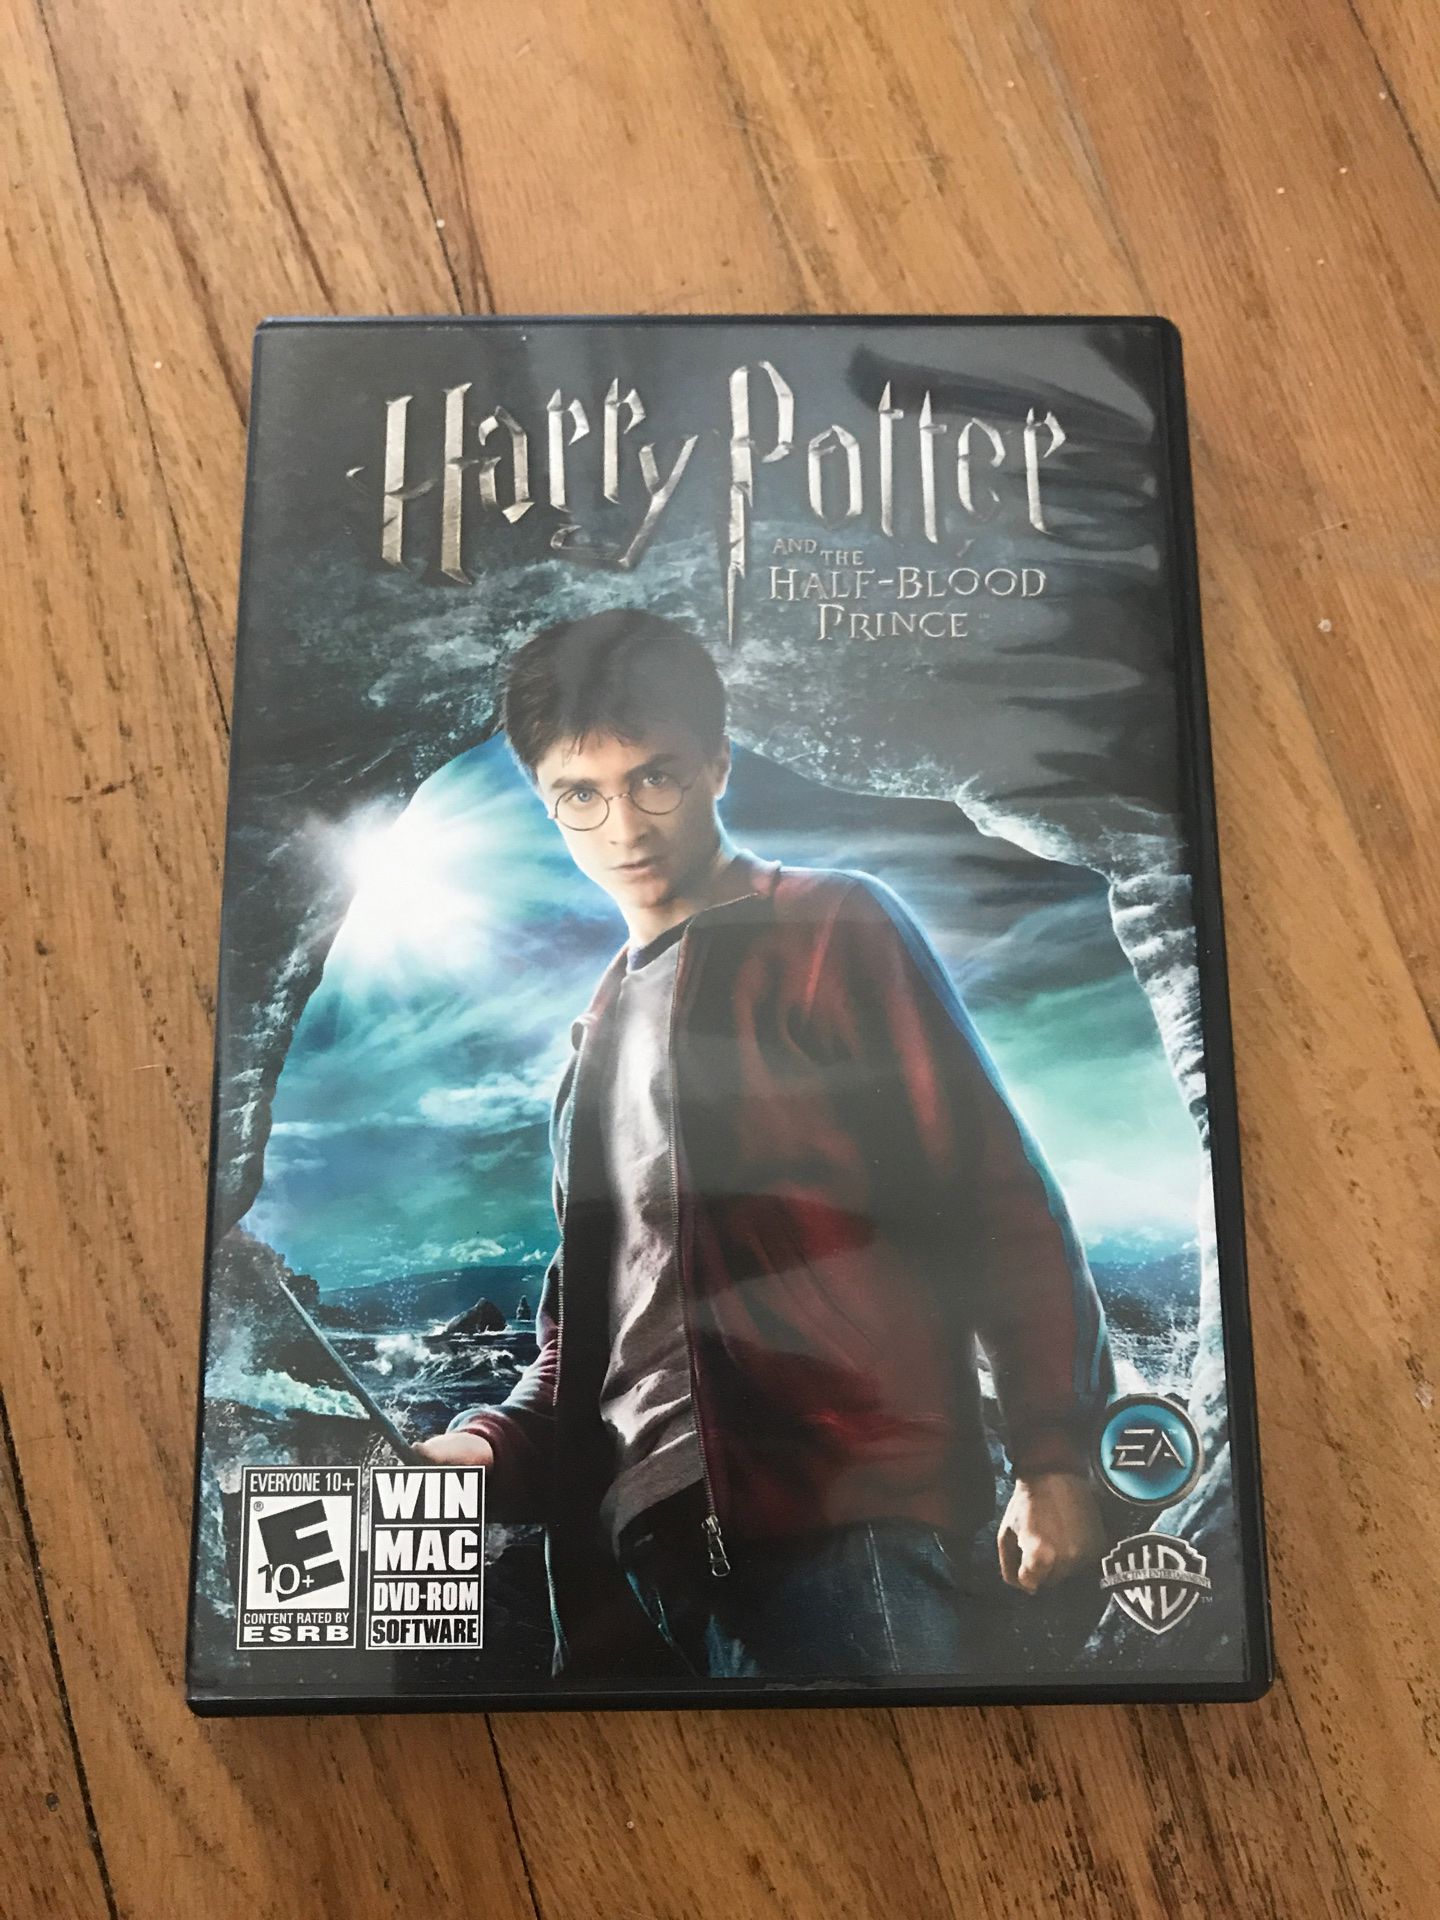 Harry Potter computer game